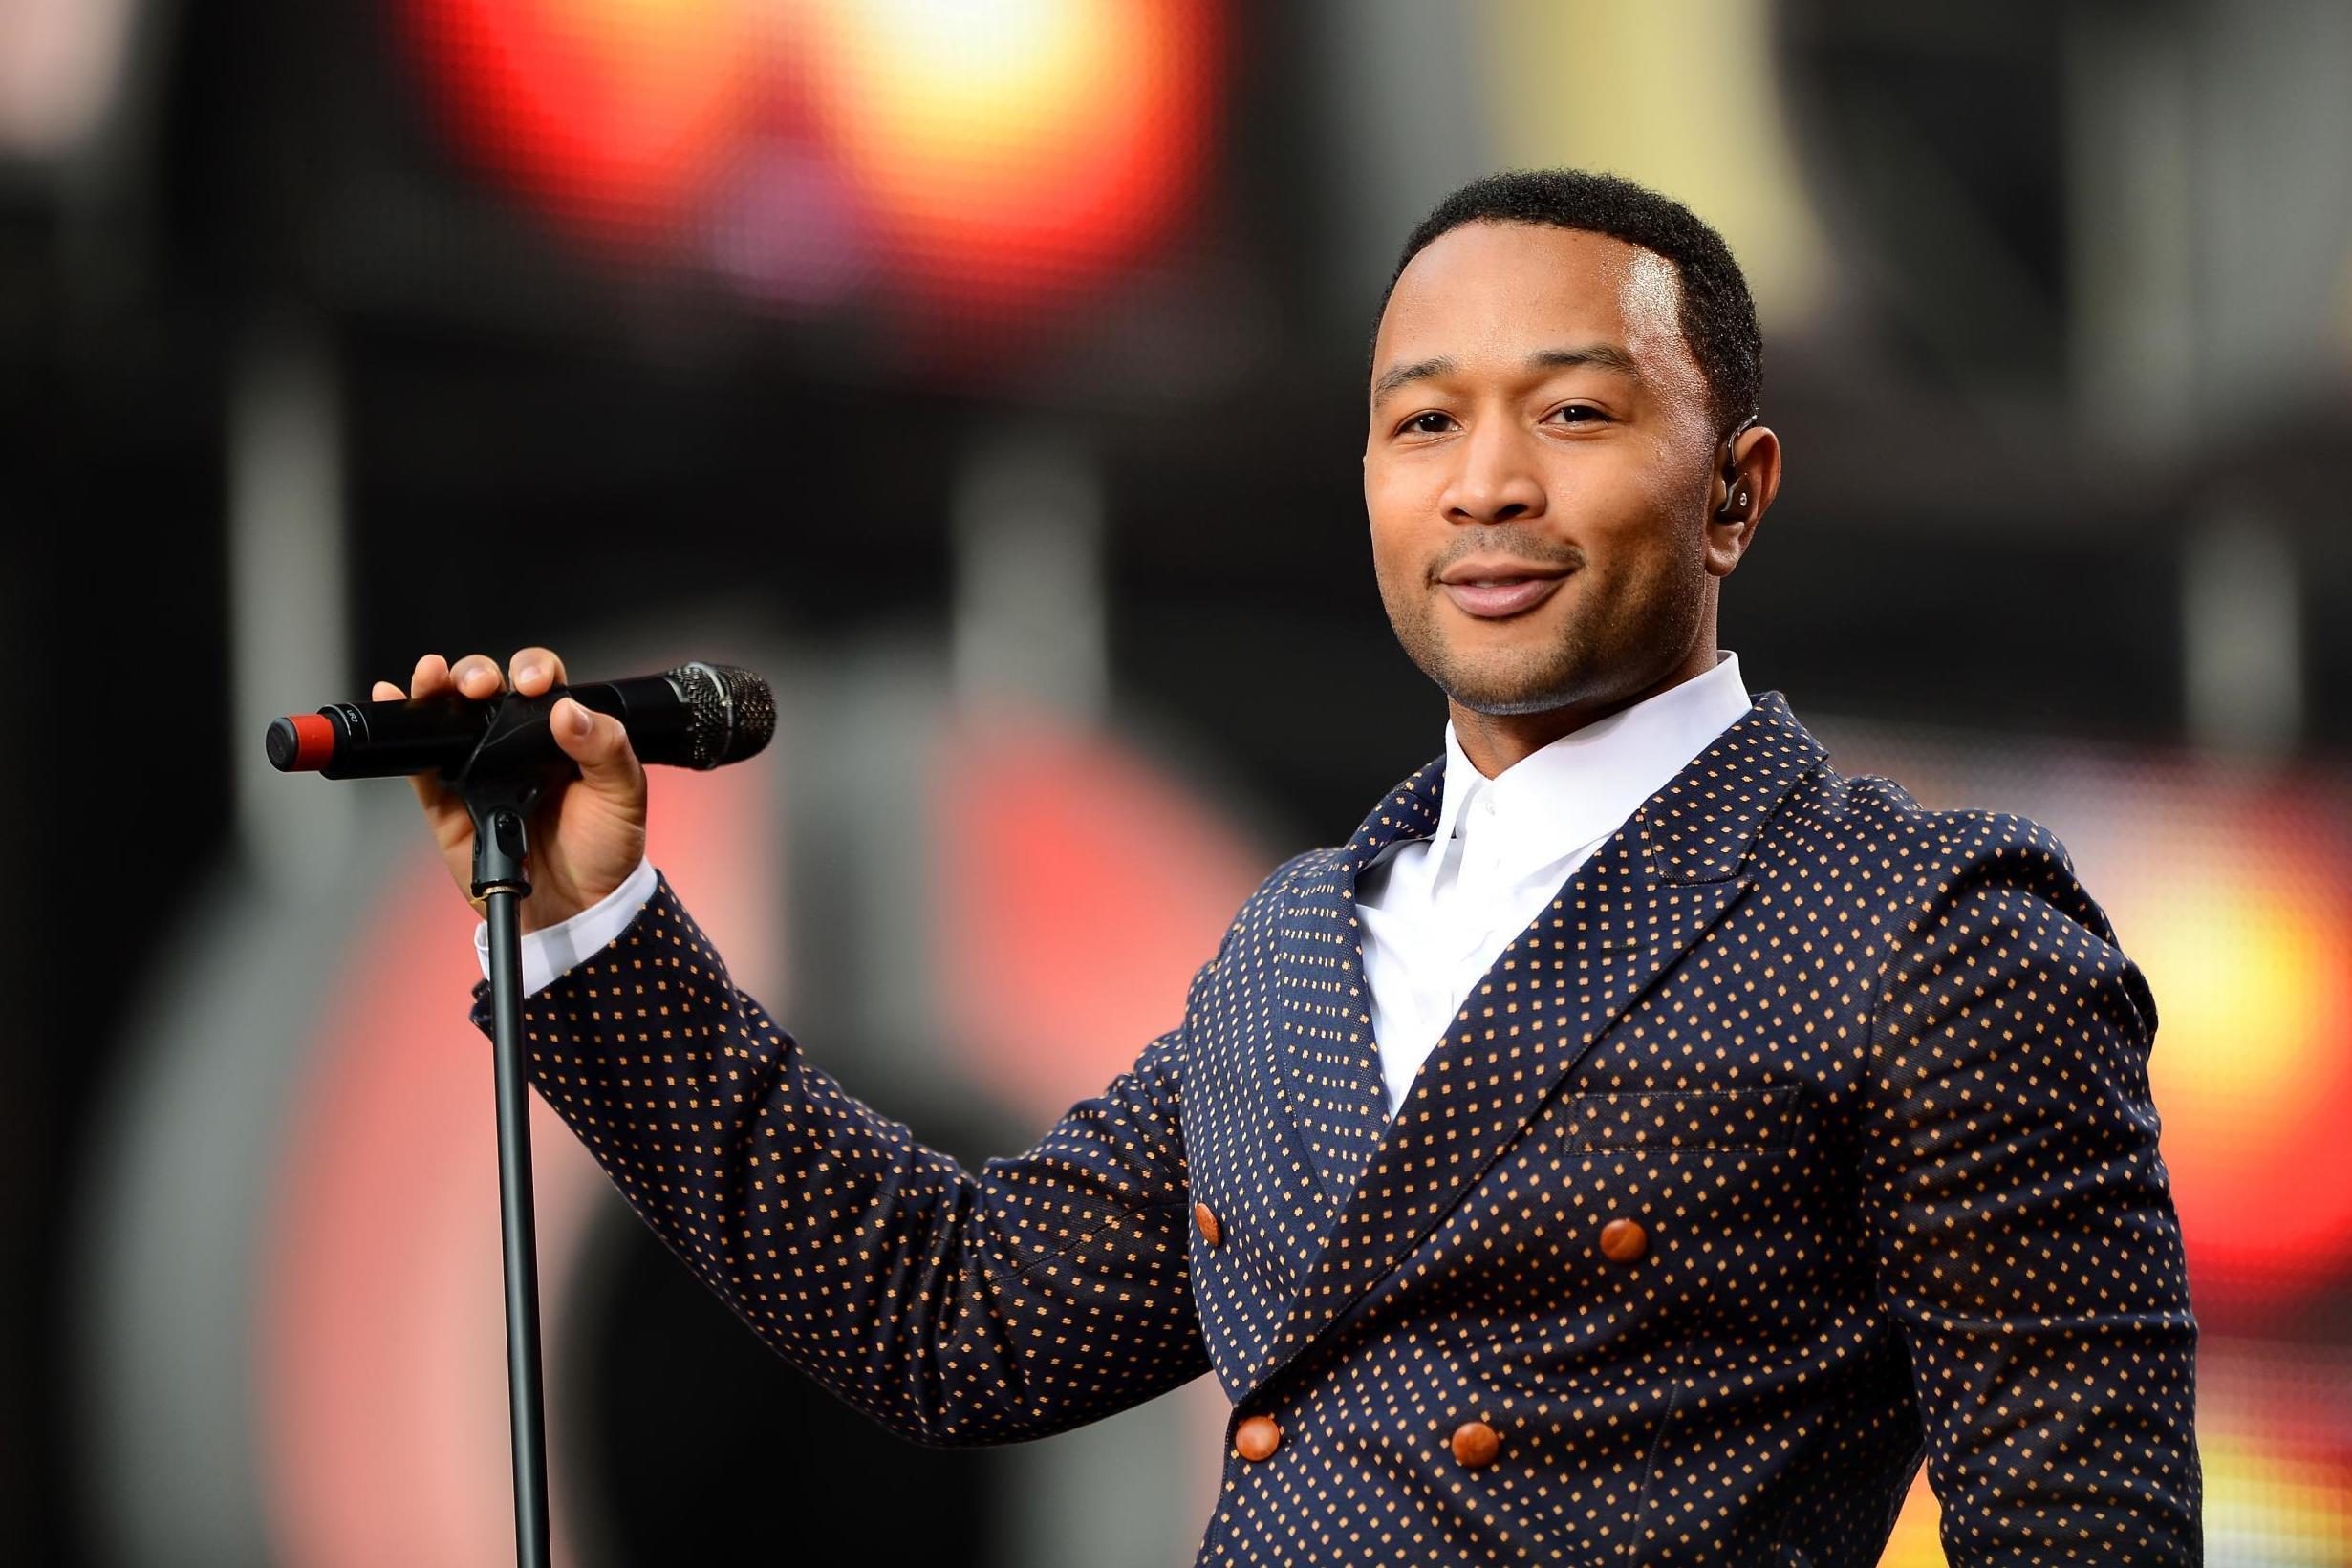 John Legend to release new version of 'Baby It's Cold Outside' with Kelly Clarkson focusing on consent